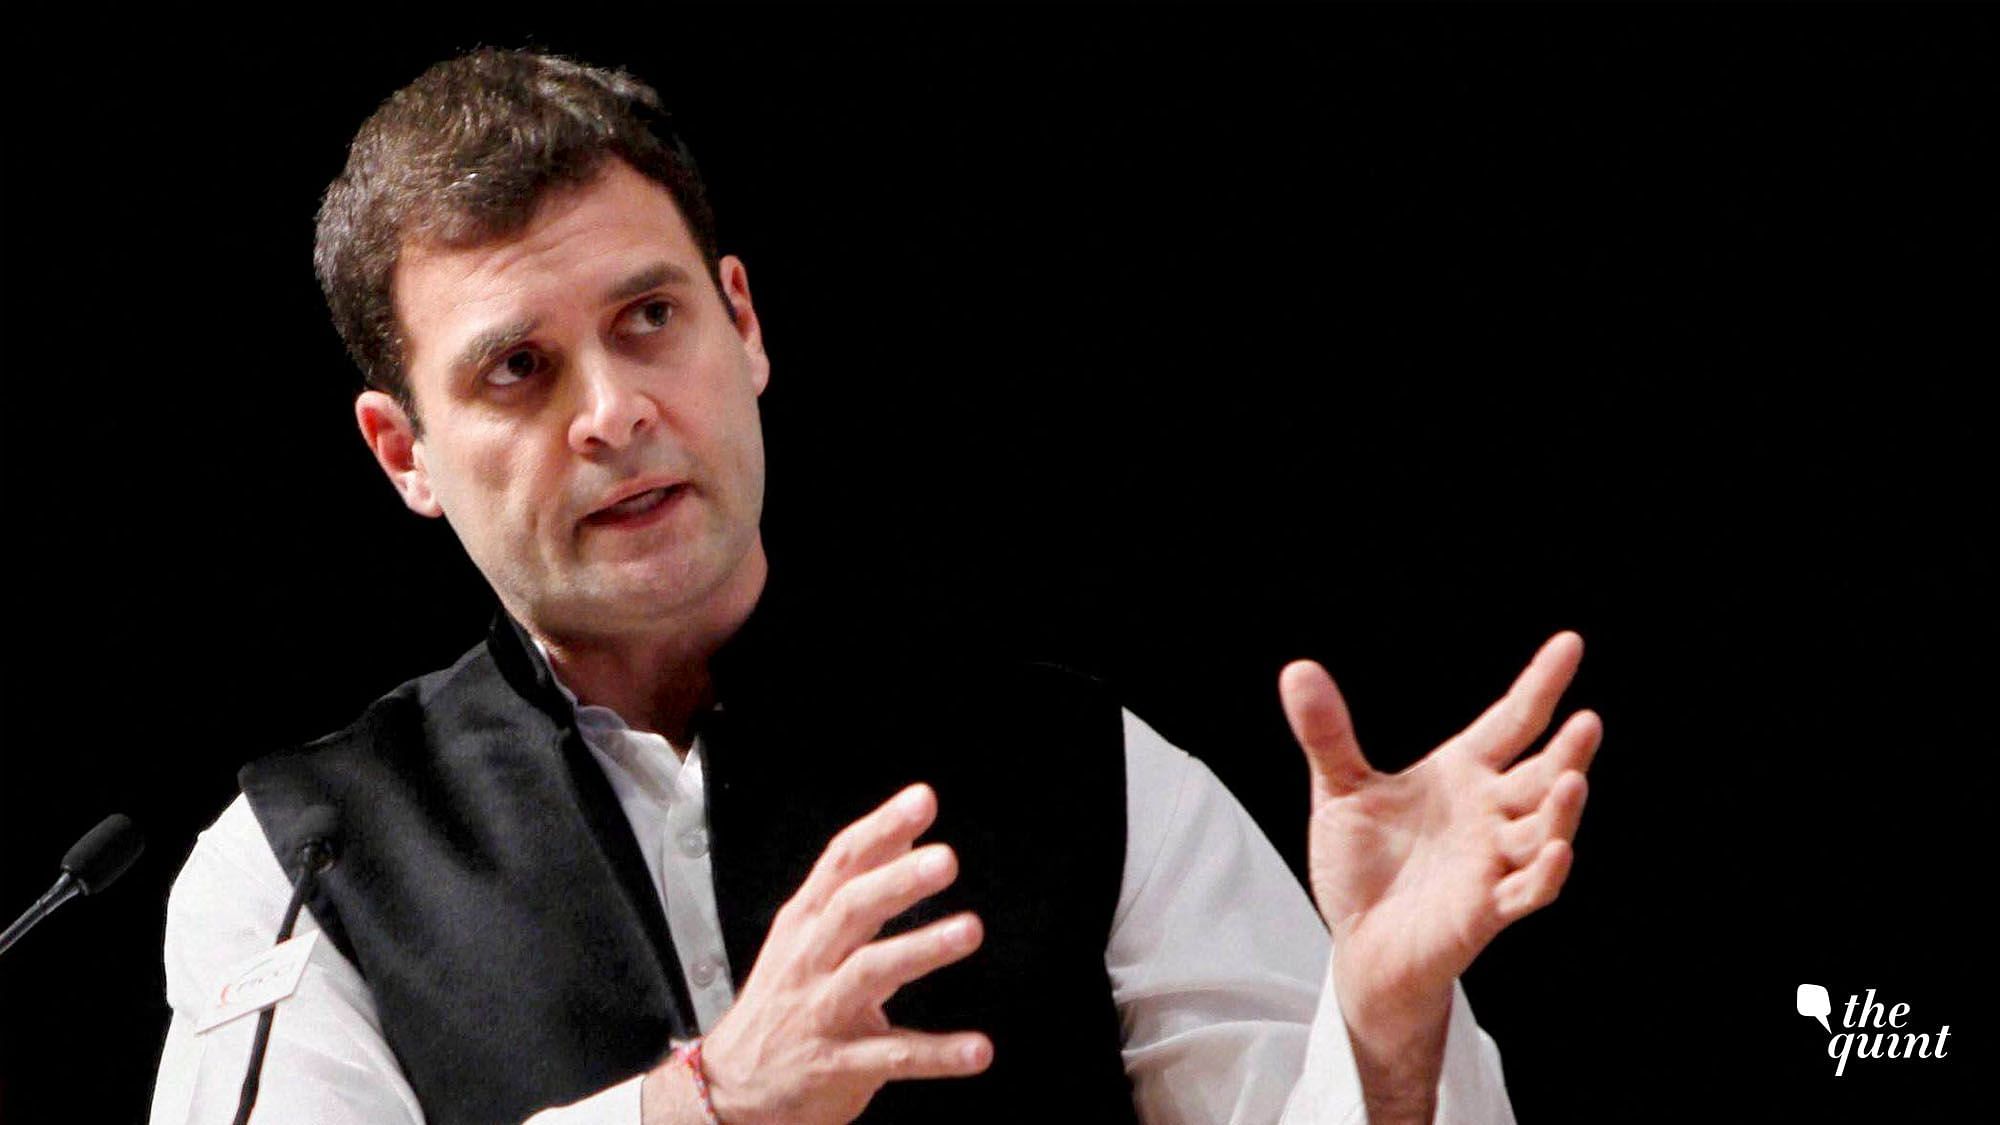 Rahul Gandhi said Modi’s promises were never meant to be implemented.